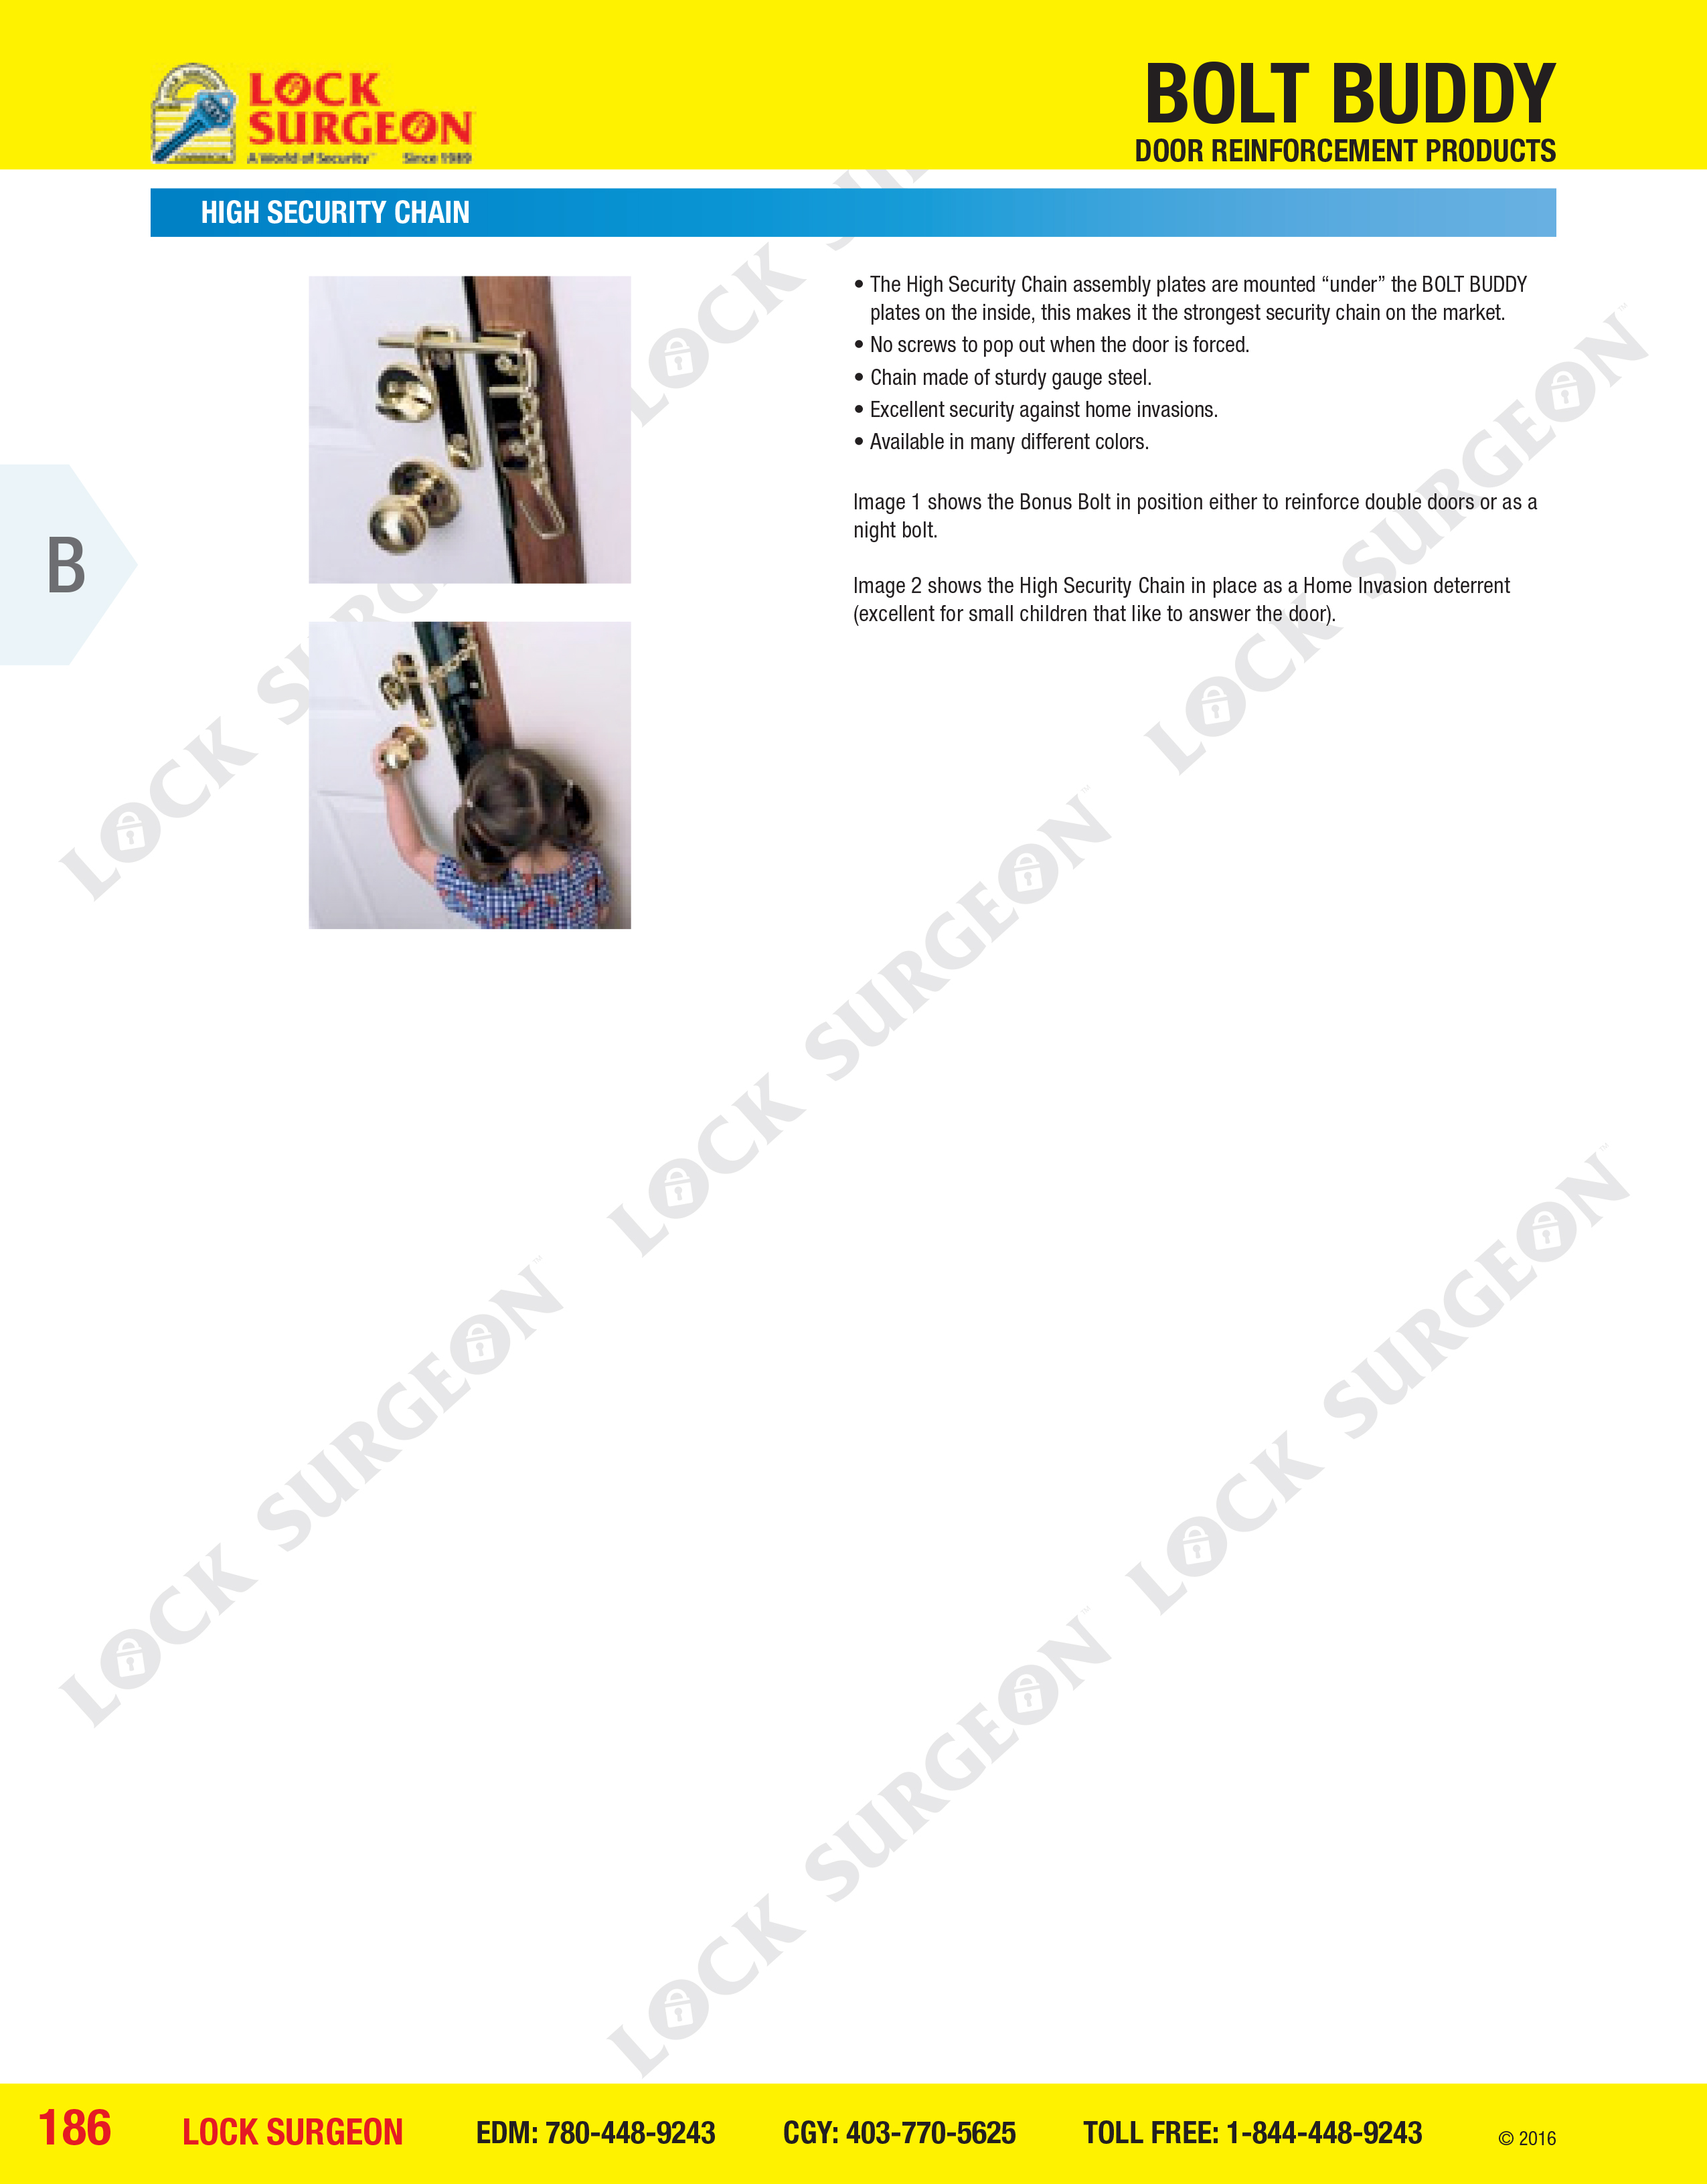 High security chain assembly Acheson